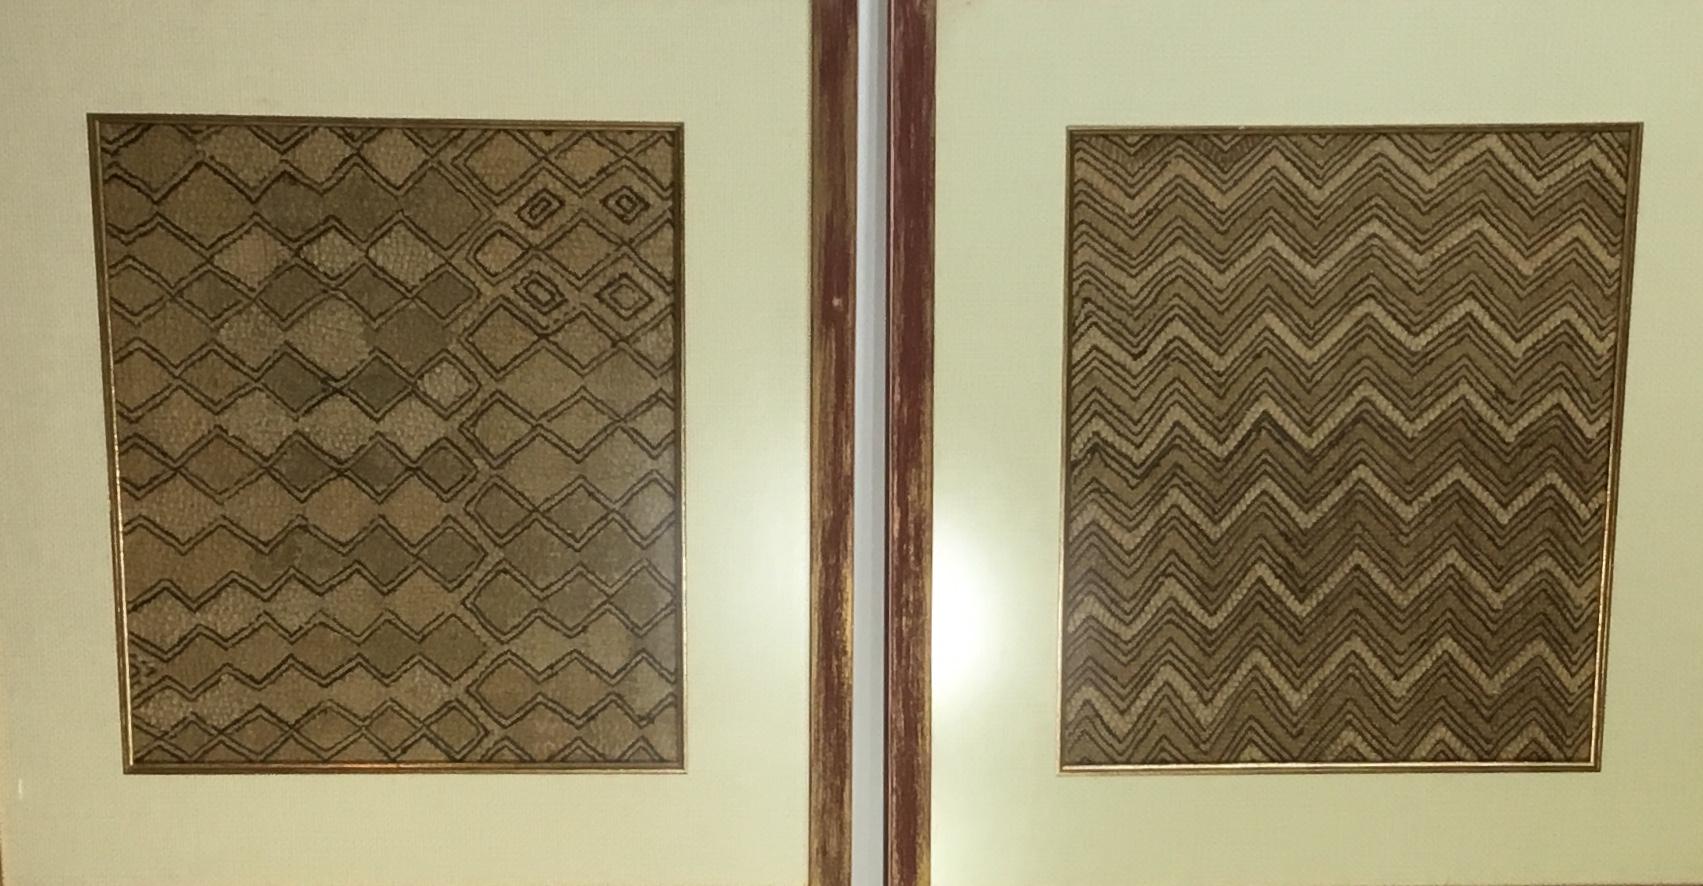 Pair of Kuba cloth from Congo. Woven raffia in traditional geometric pattern. Mounted in a frames with glass for wall hanging. Can be hung horizontally or vertically. Muted soft colors and quality framing.